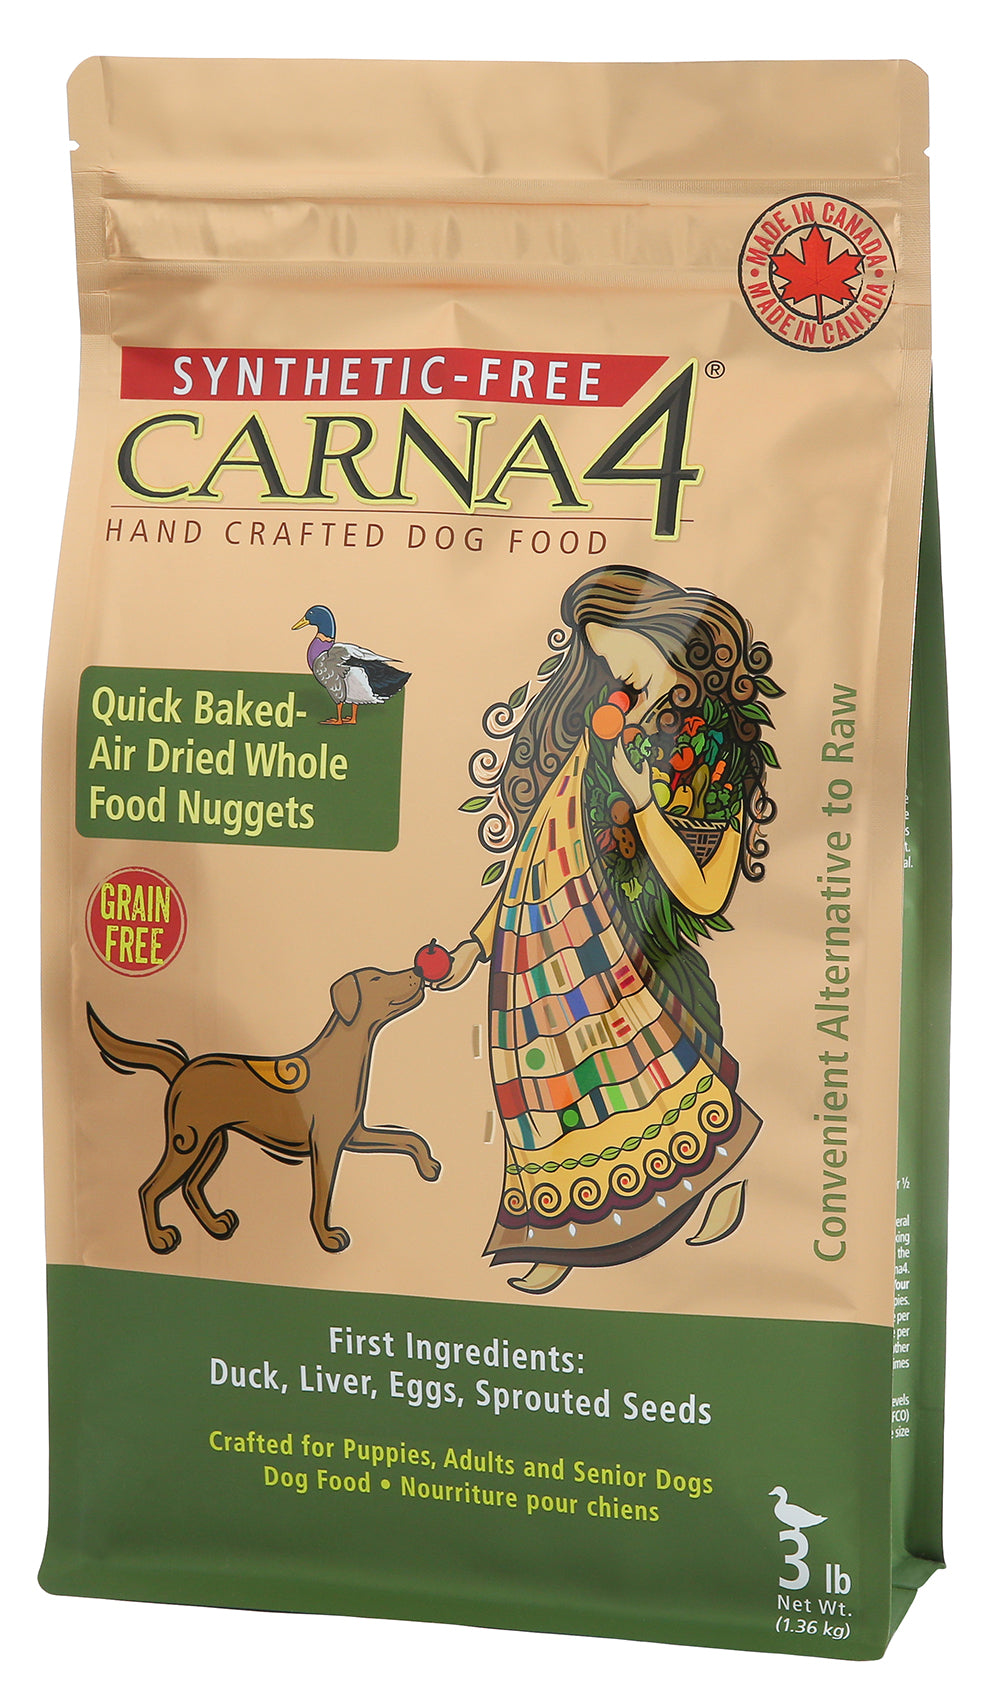 Carna4 - Quick Baked - Air Dried Whole Food Nuggets - Duck